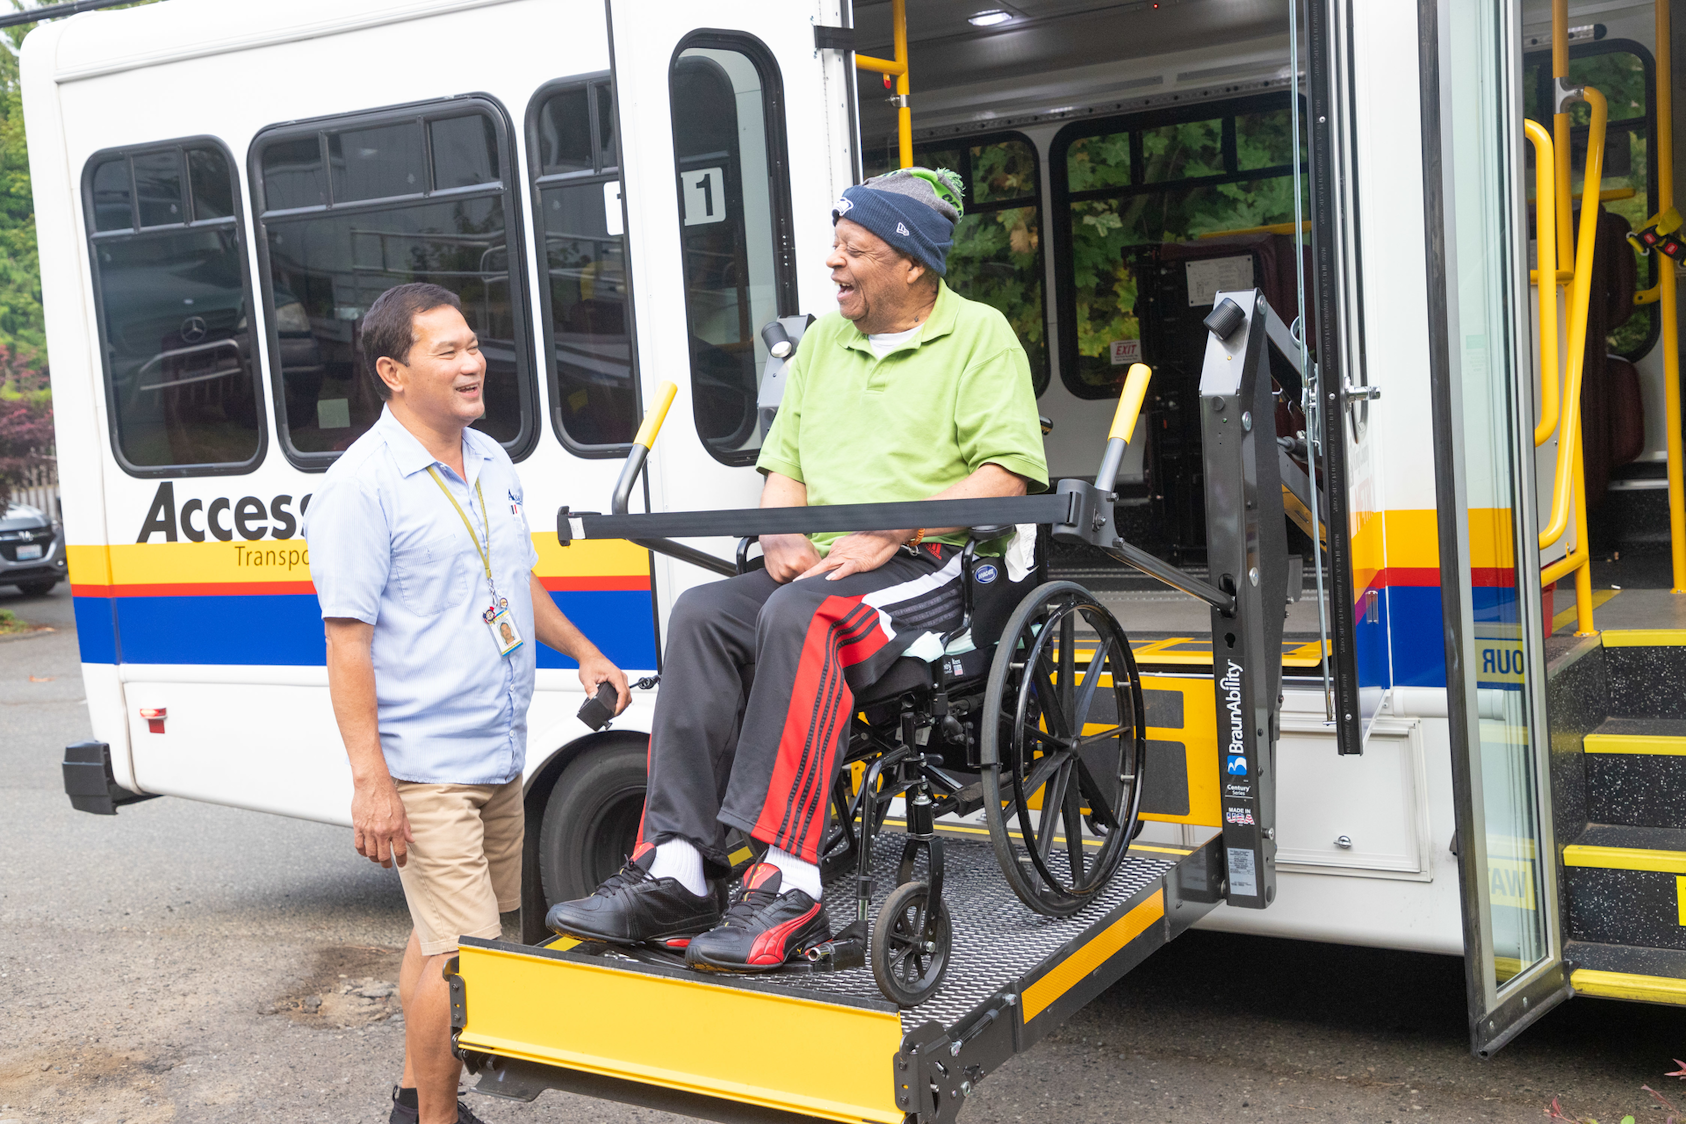 A Service Turnaround How King County Metro is making its paratransit